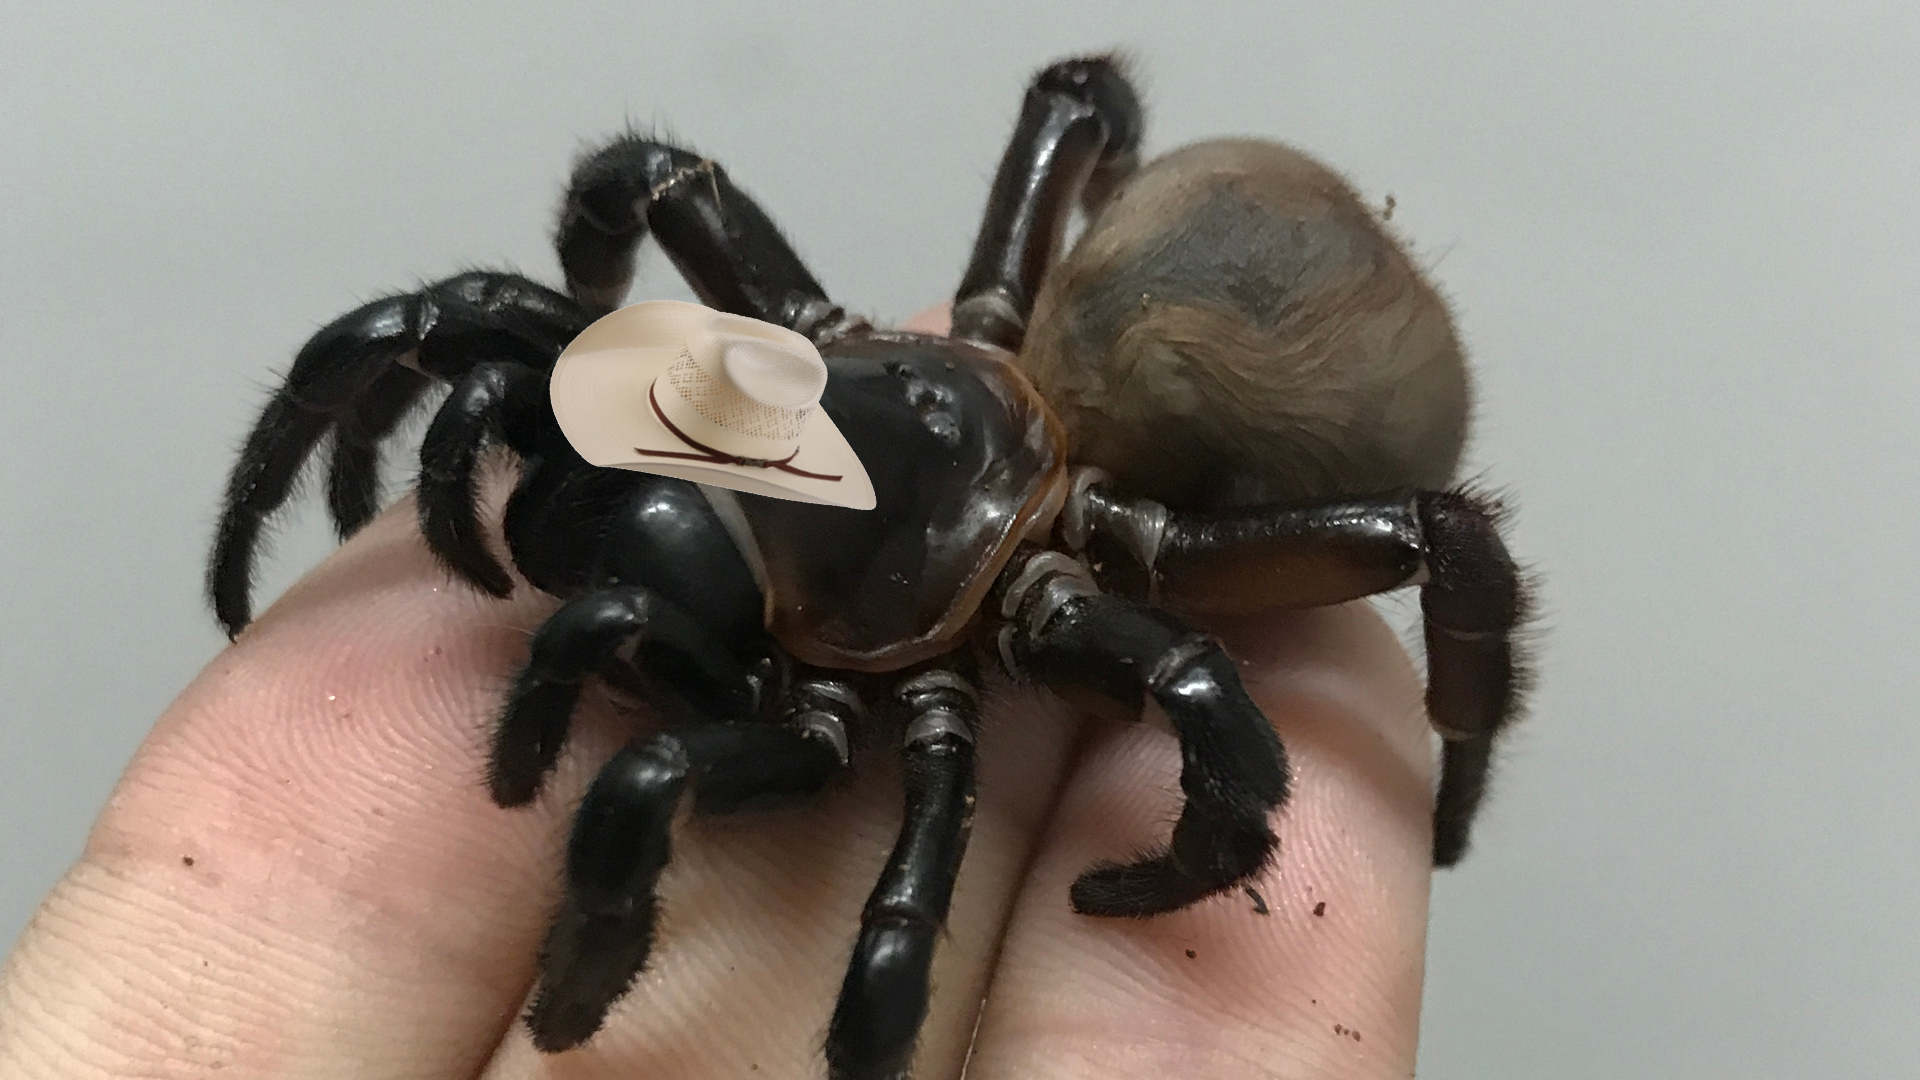 A trapdoor spider wearing a small cowboy hat